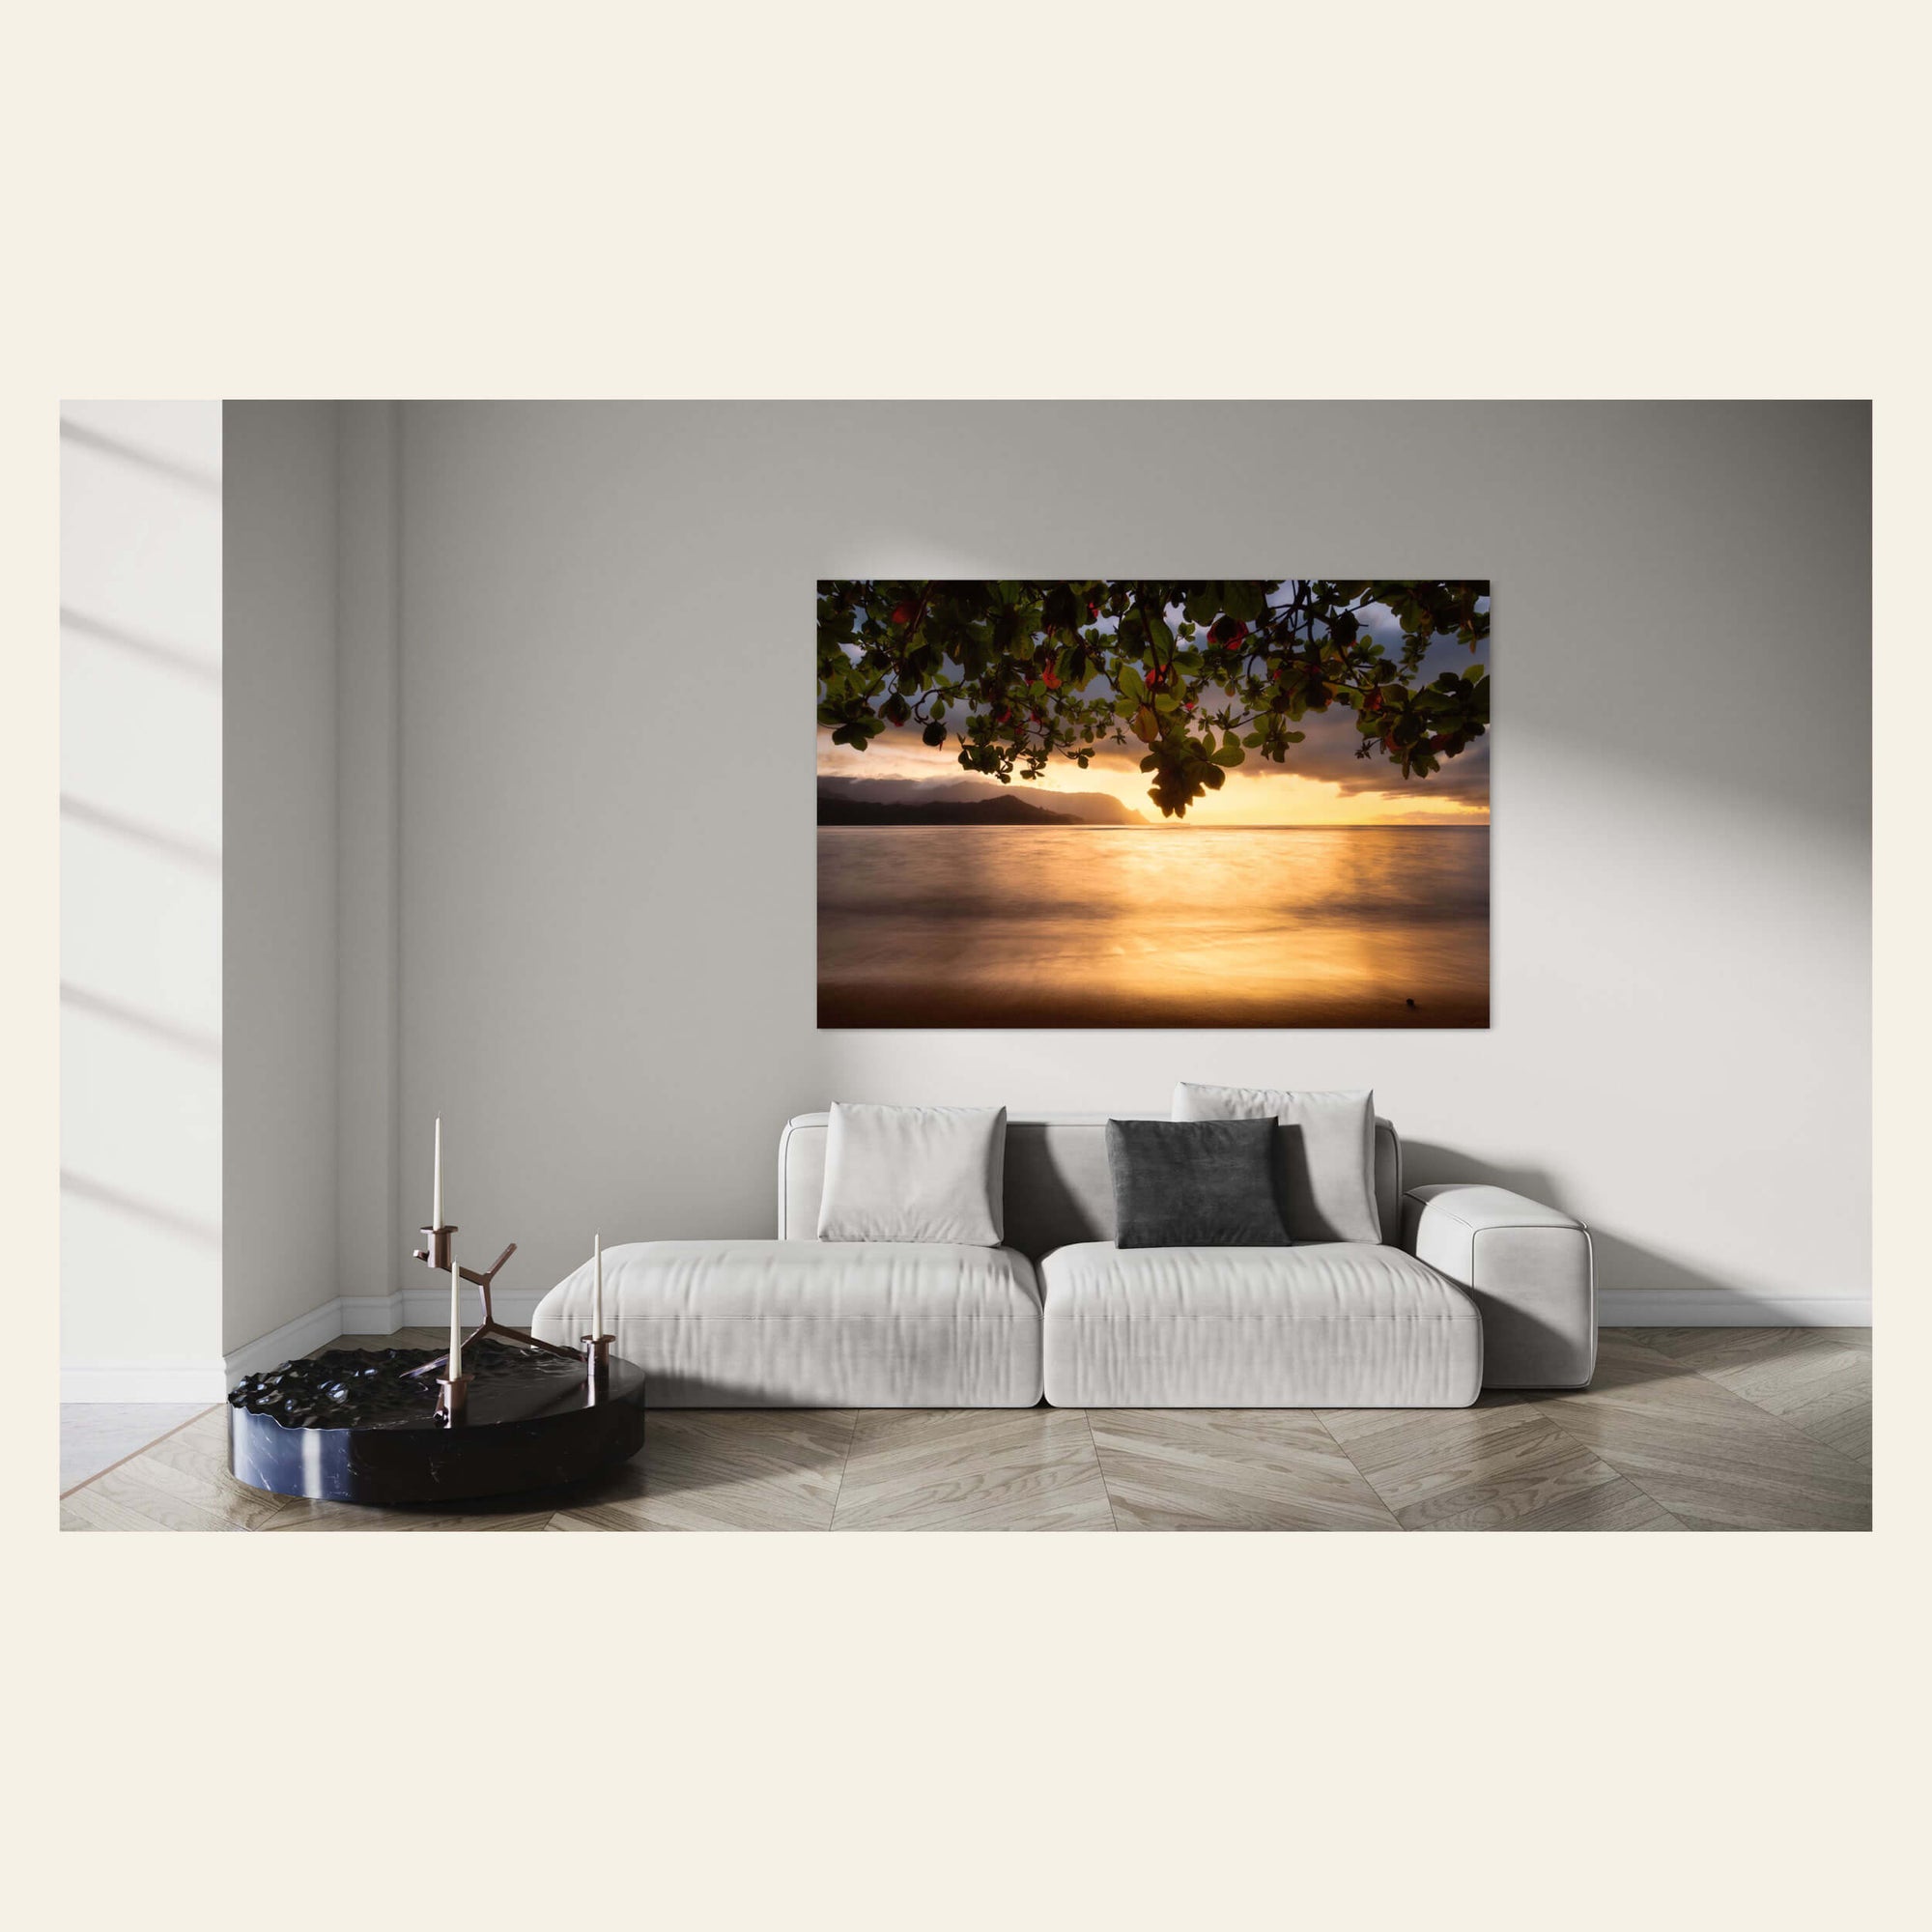 A picture of Pu'u Poa Beach at the Hanalei Bay Resort in Kauai hangs in a living room.